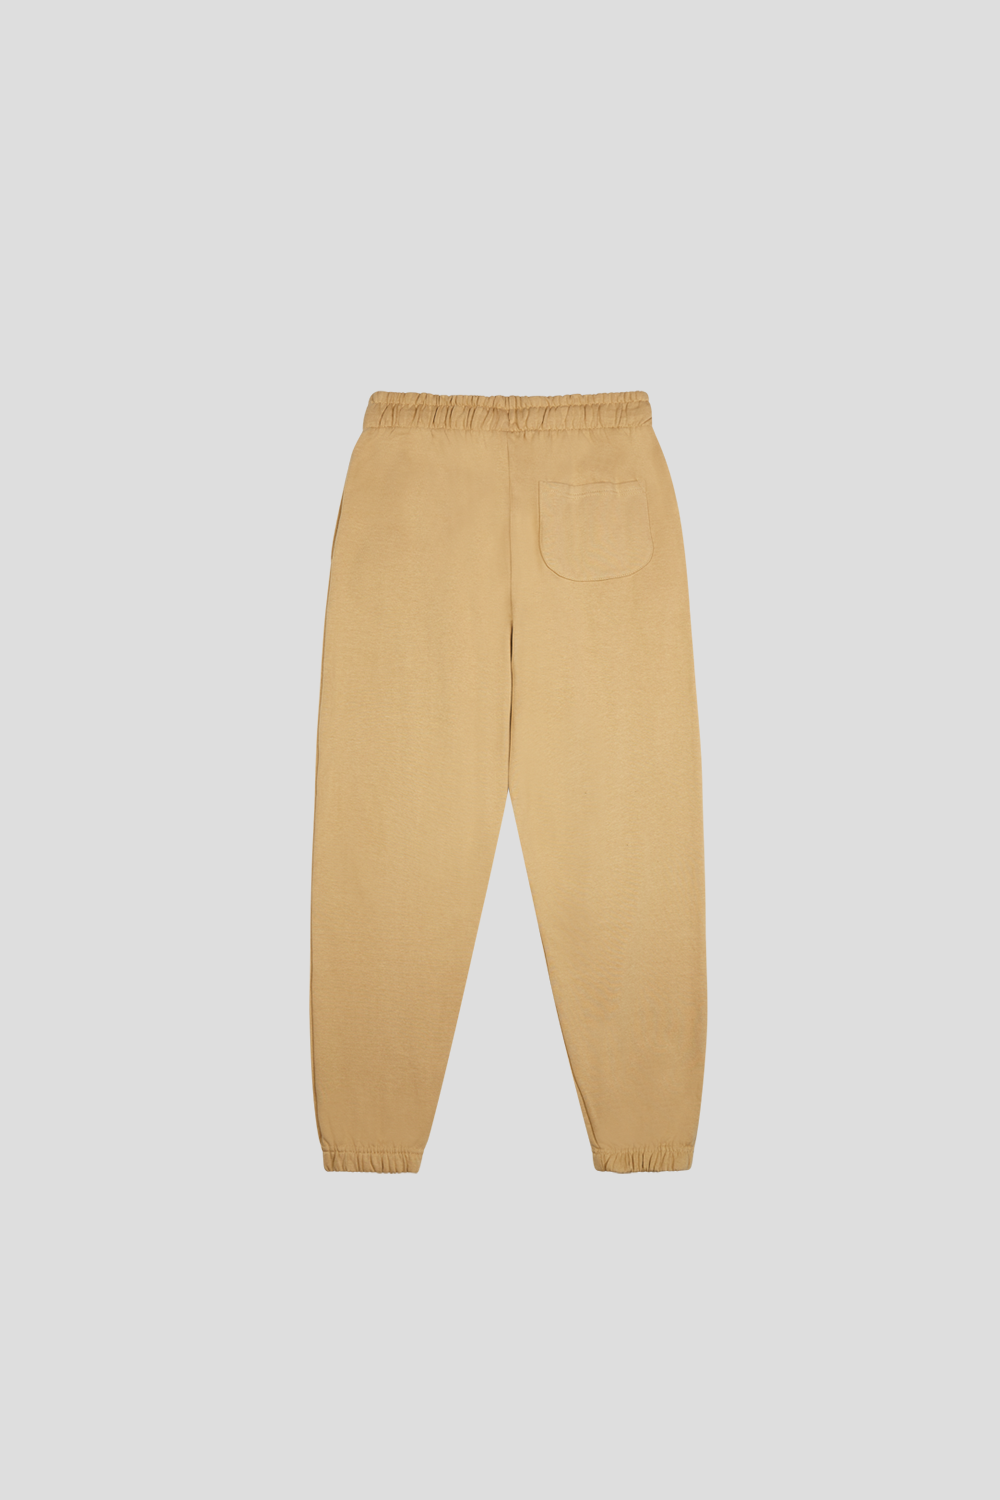 Industry Elasticated Cuff Jogger Croissant